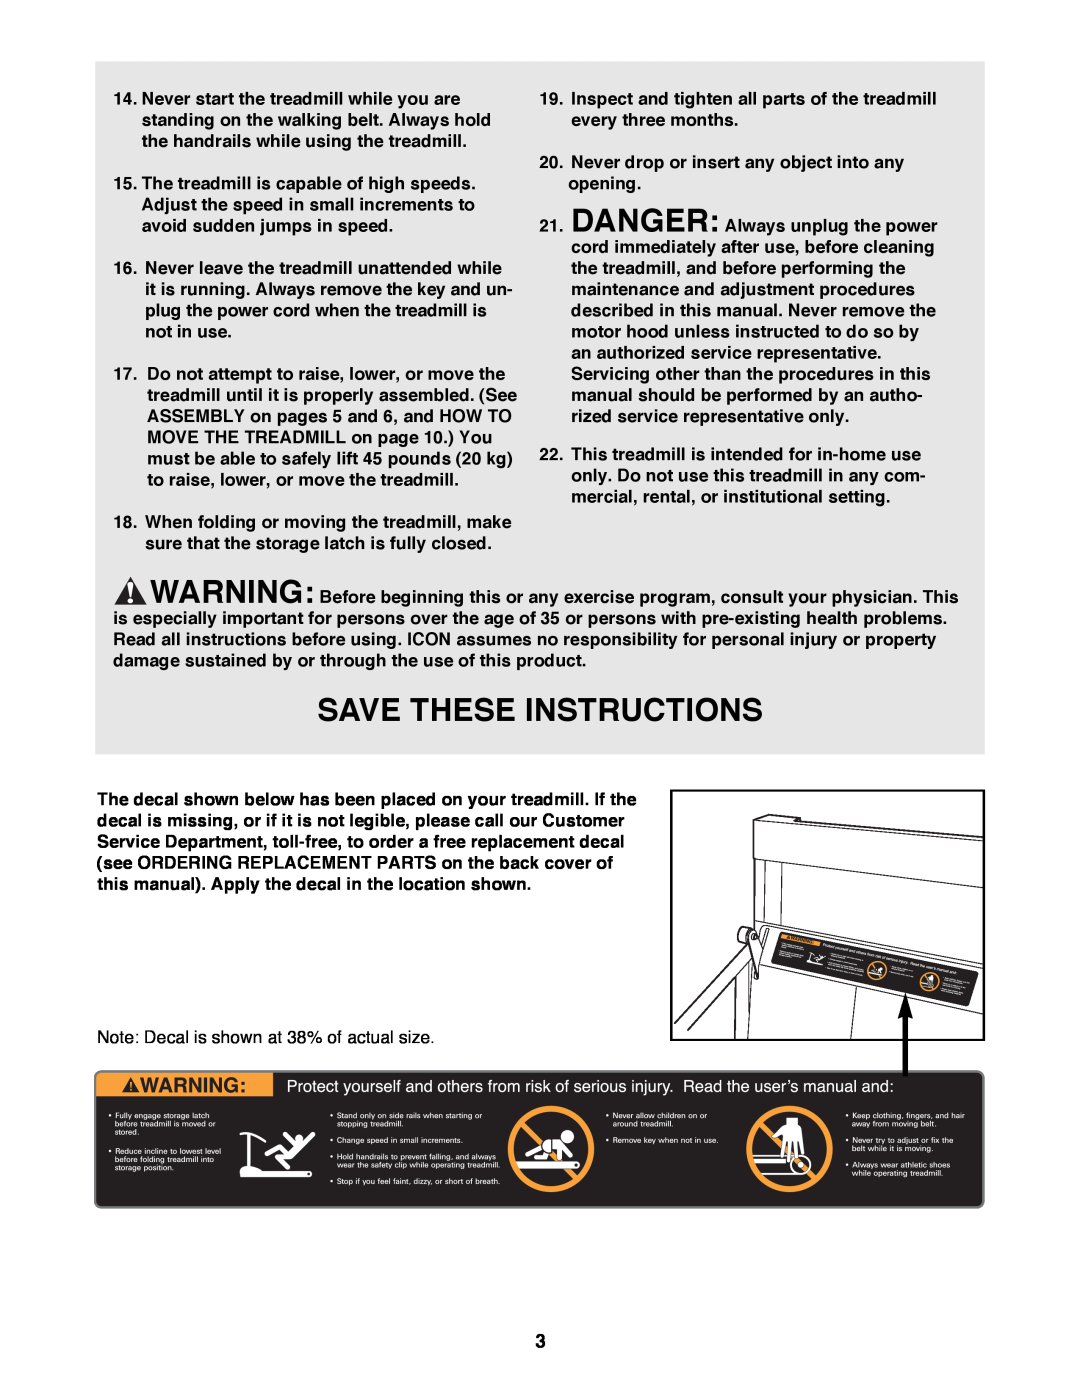 ProForm PFTL39191 user manual Save These Instructions, Inspect and tighten all parts of the treadmill every three months 